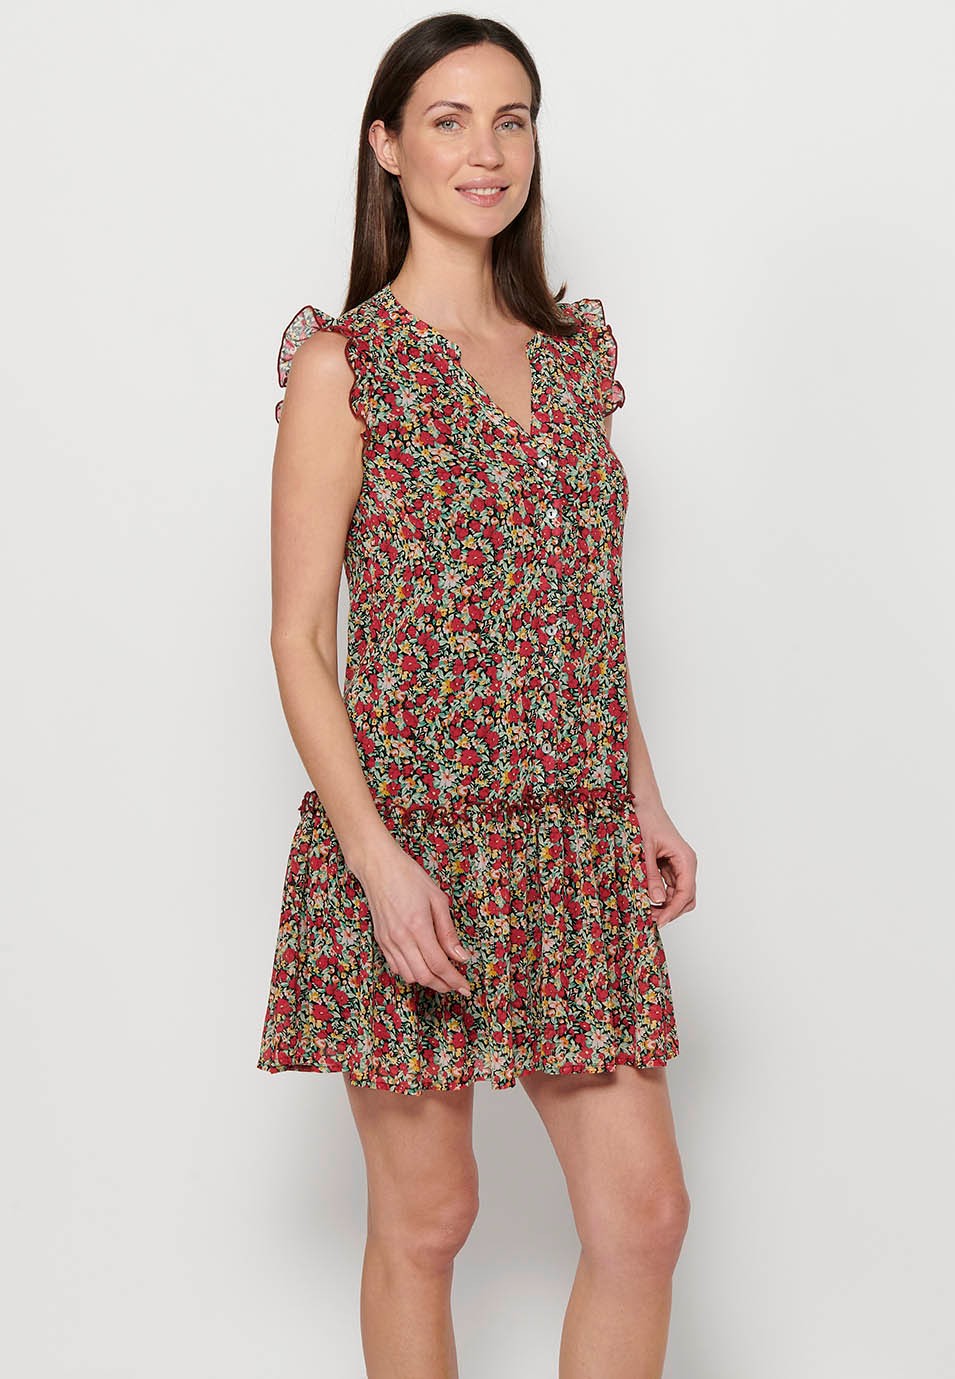 Short shirt dress with hip cut and ruffle finish with button front closure and Multicolor floral print for Women 1